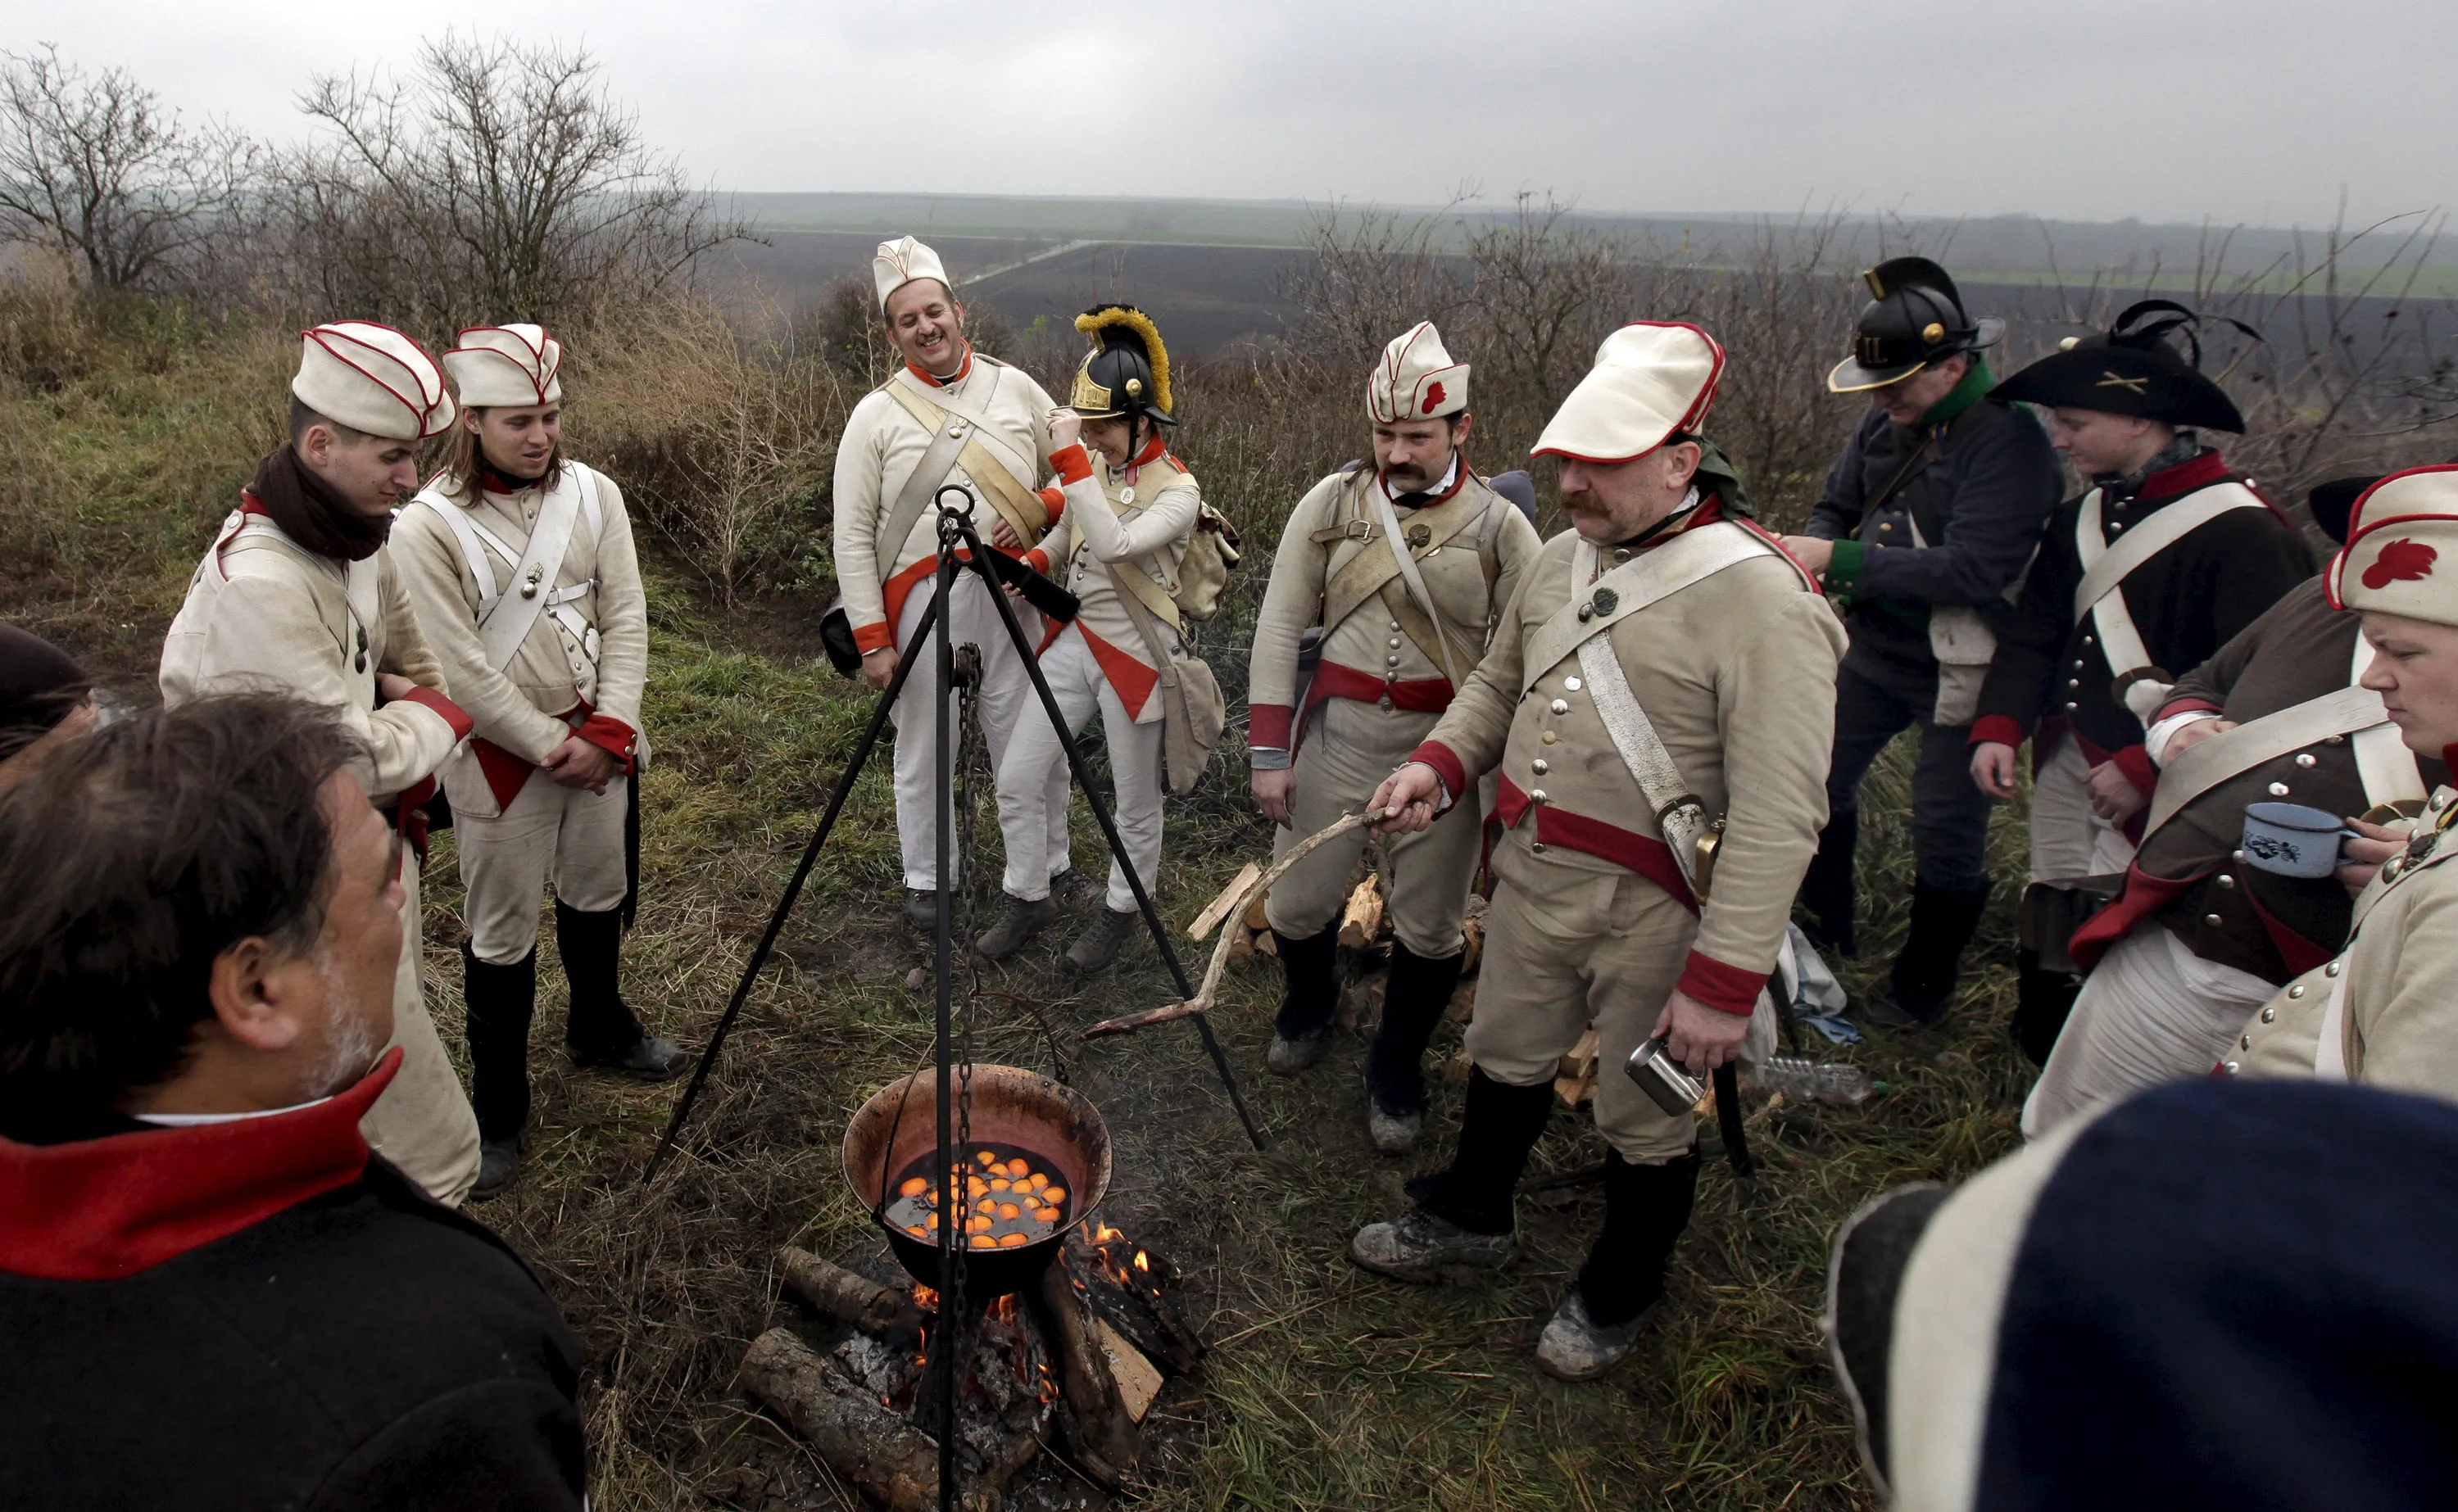 History as re-enactment. Historical re-enactments.